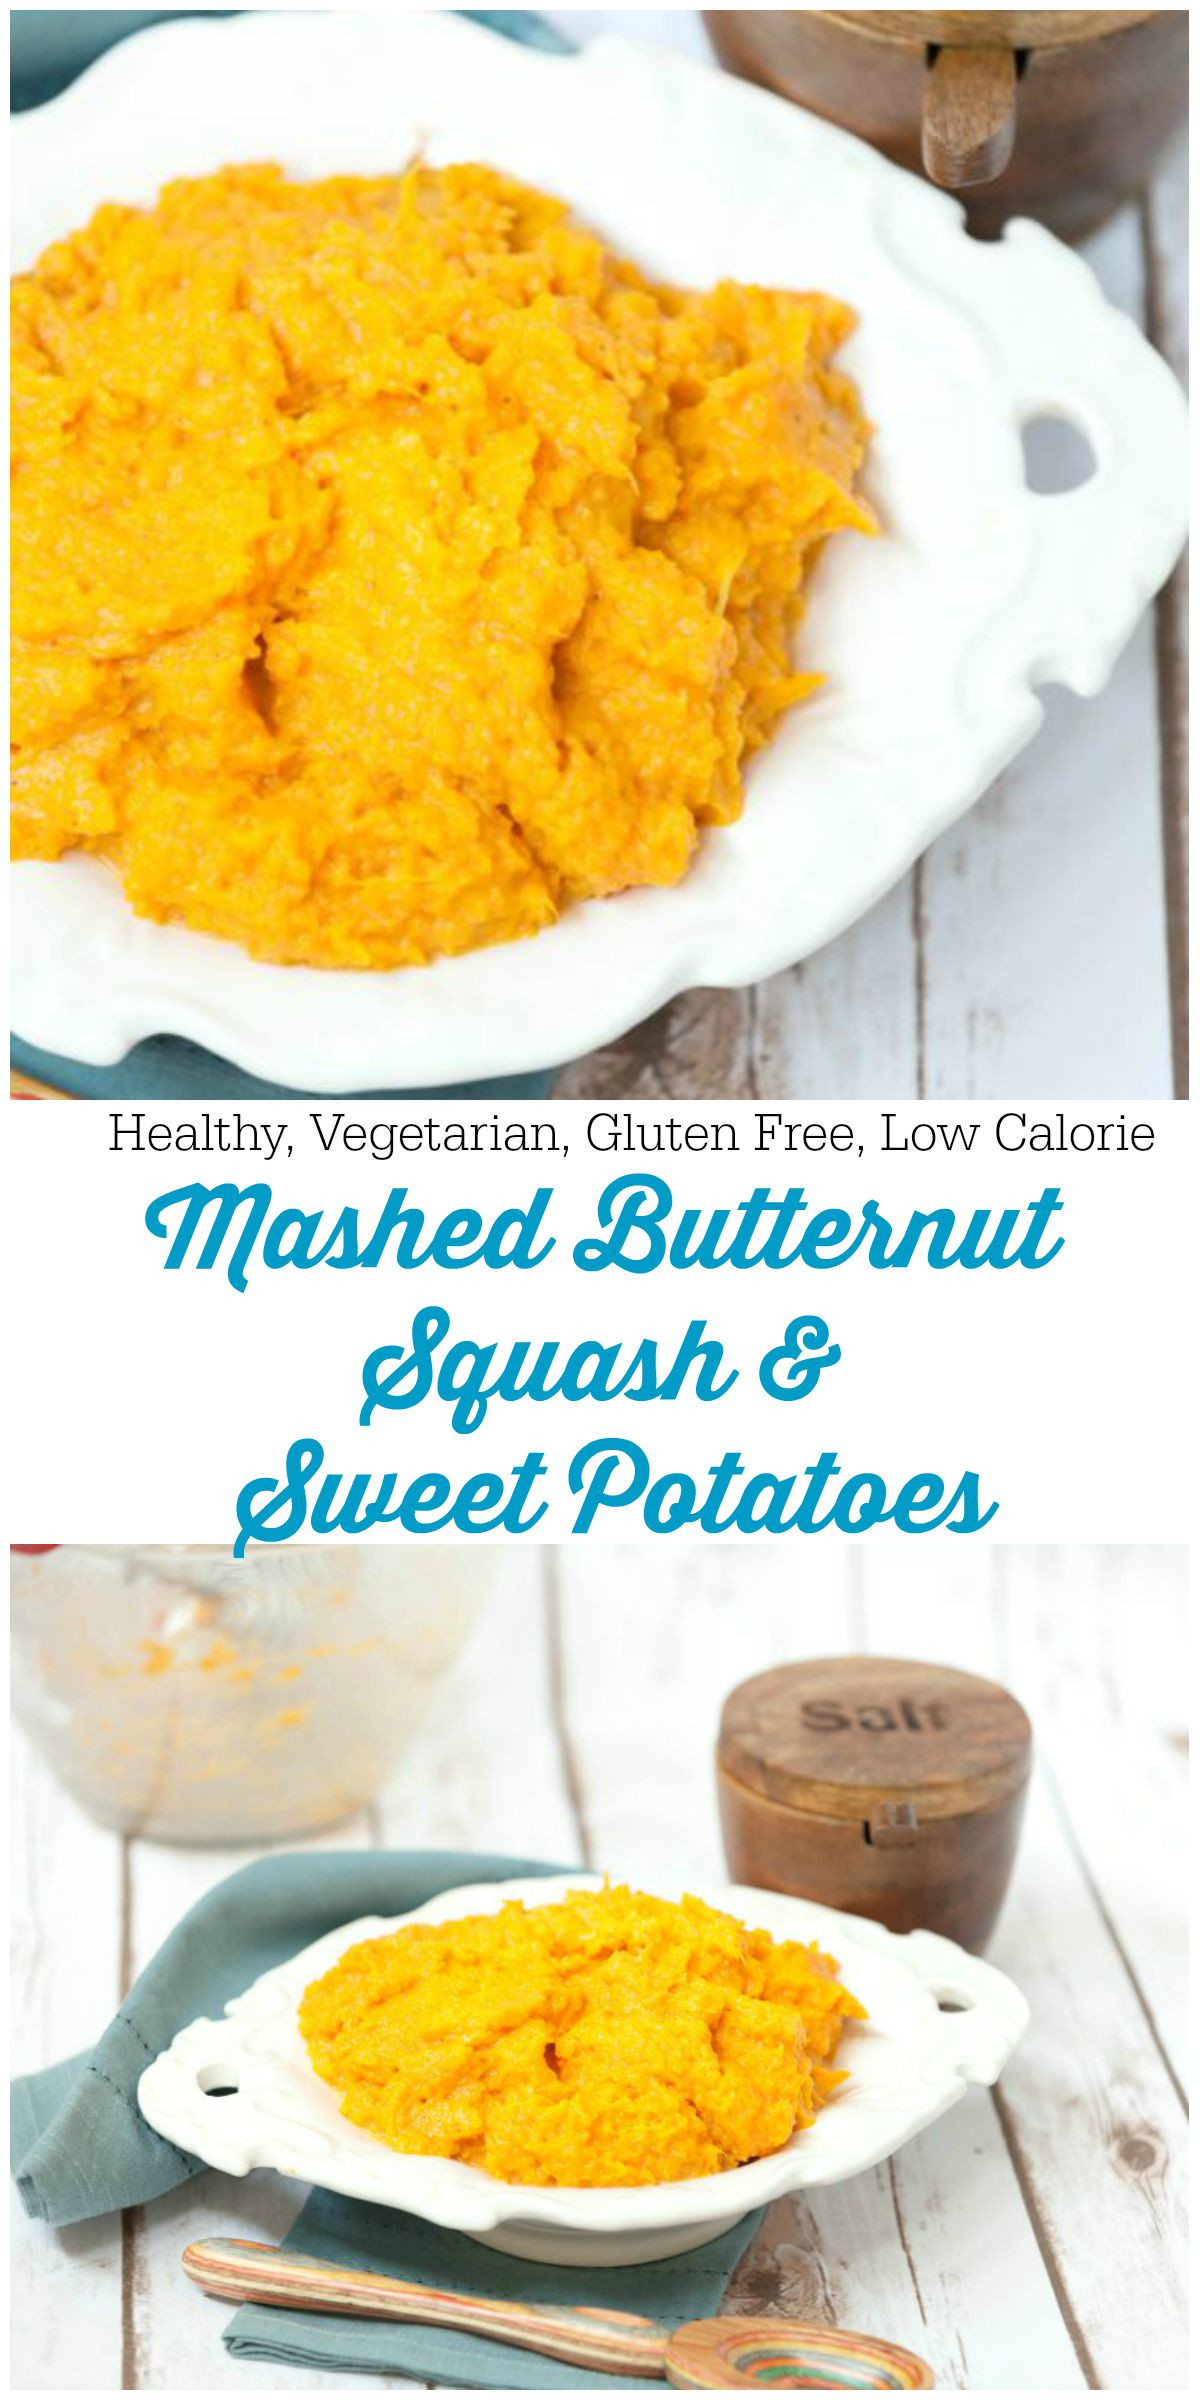 Healthy Butternut Squash Recipes
 Healthy Mashed Butternut Squash and Sweet Potatoes